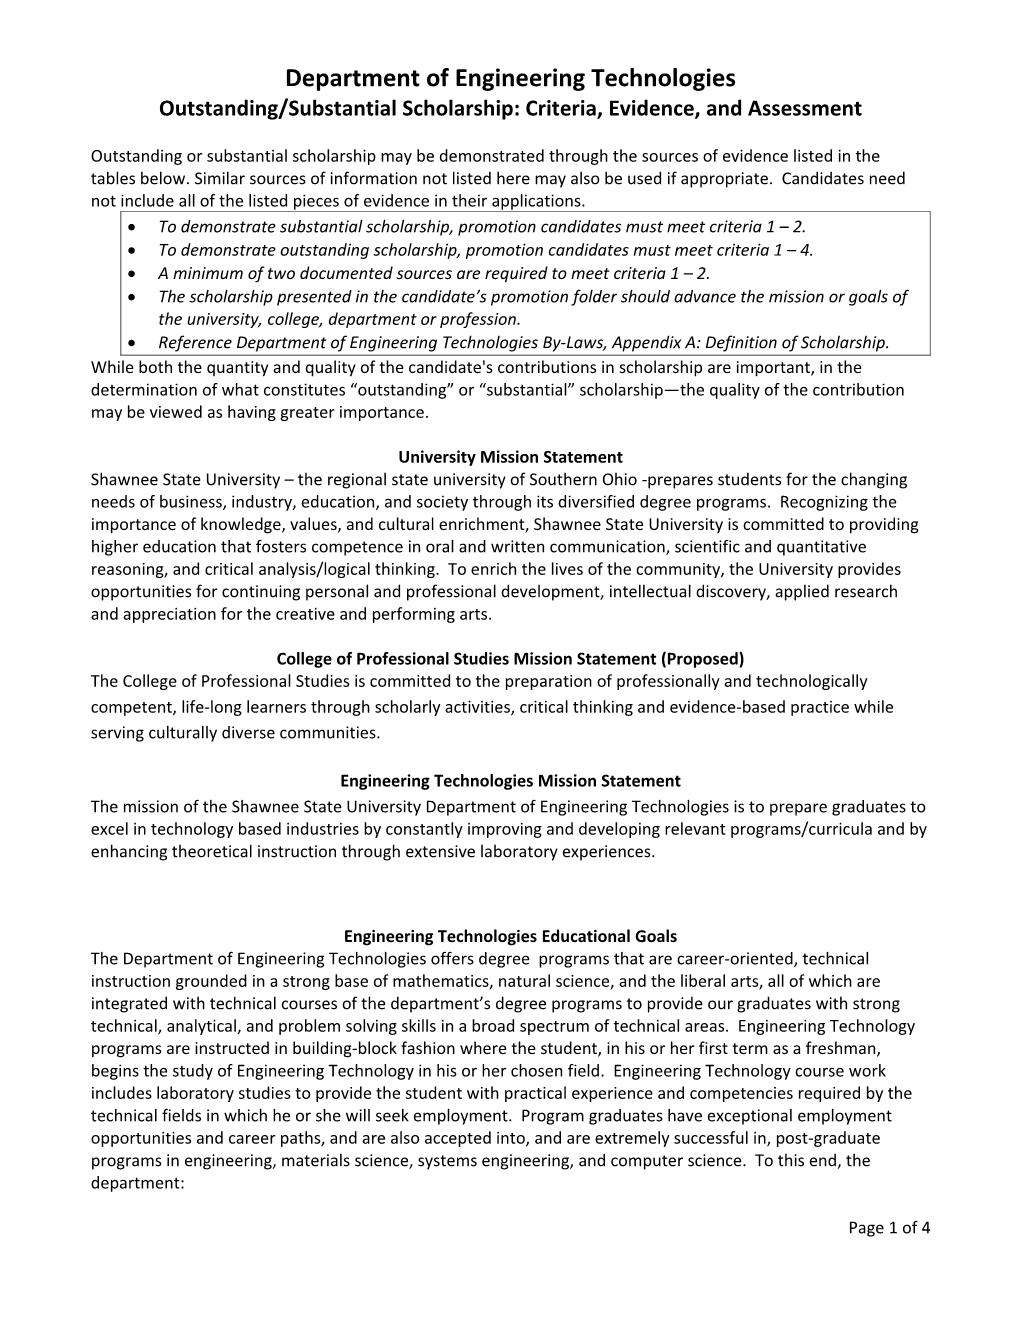 Outstanding/Substantial Scholarship: Criteria, Evidence, and Assessment